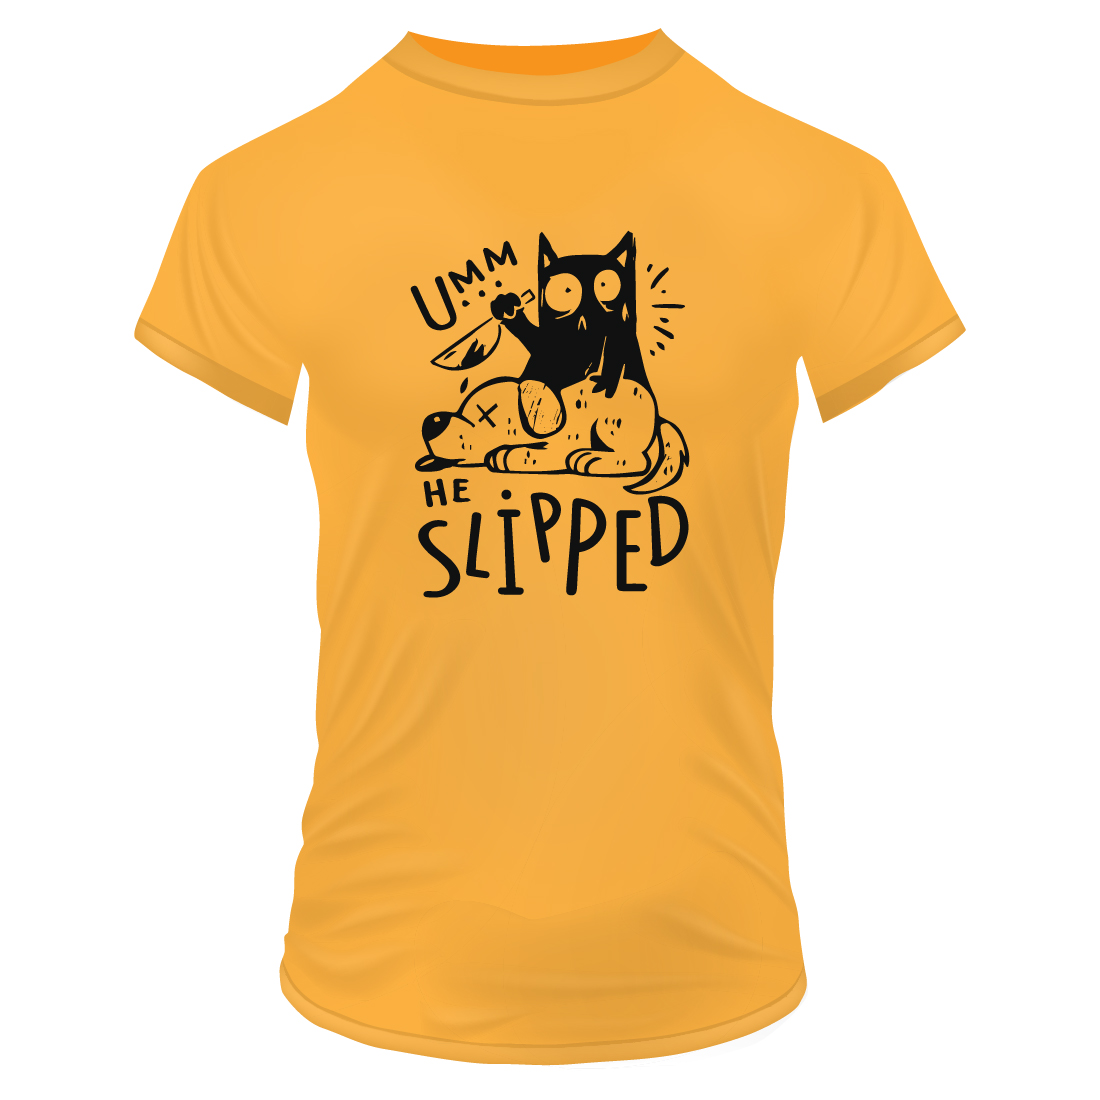 Umm, he slipped Cute funny cat killed or murdered the dog Vector Illustration for tshirt cover image.